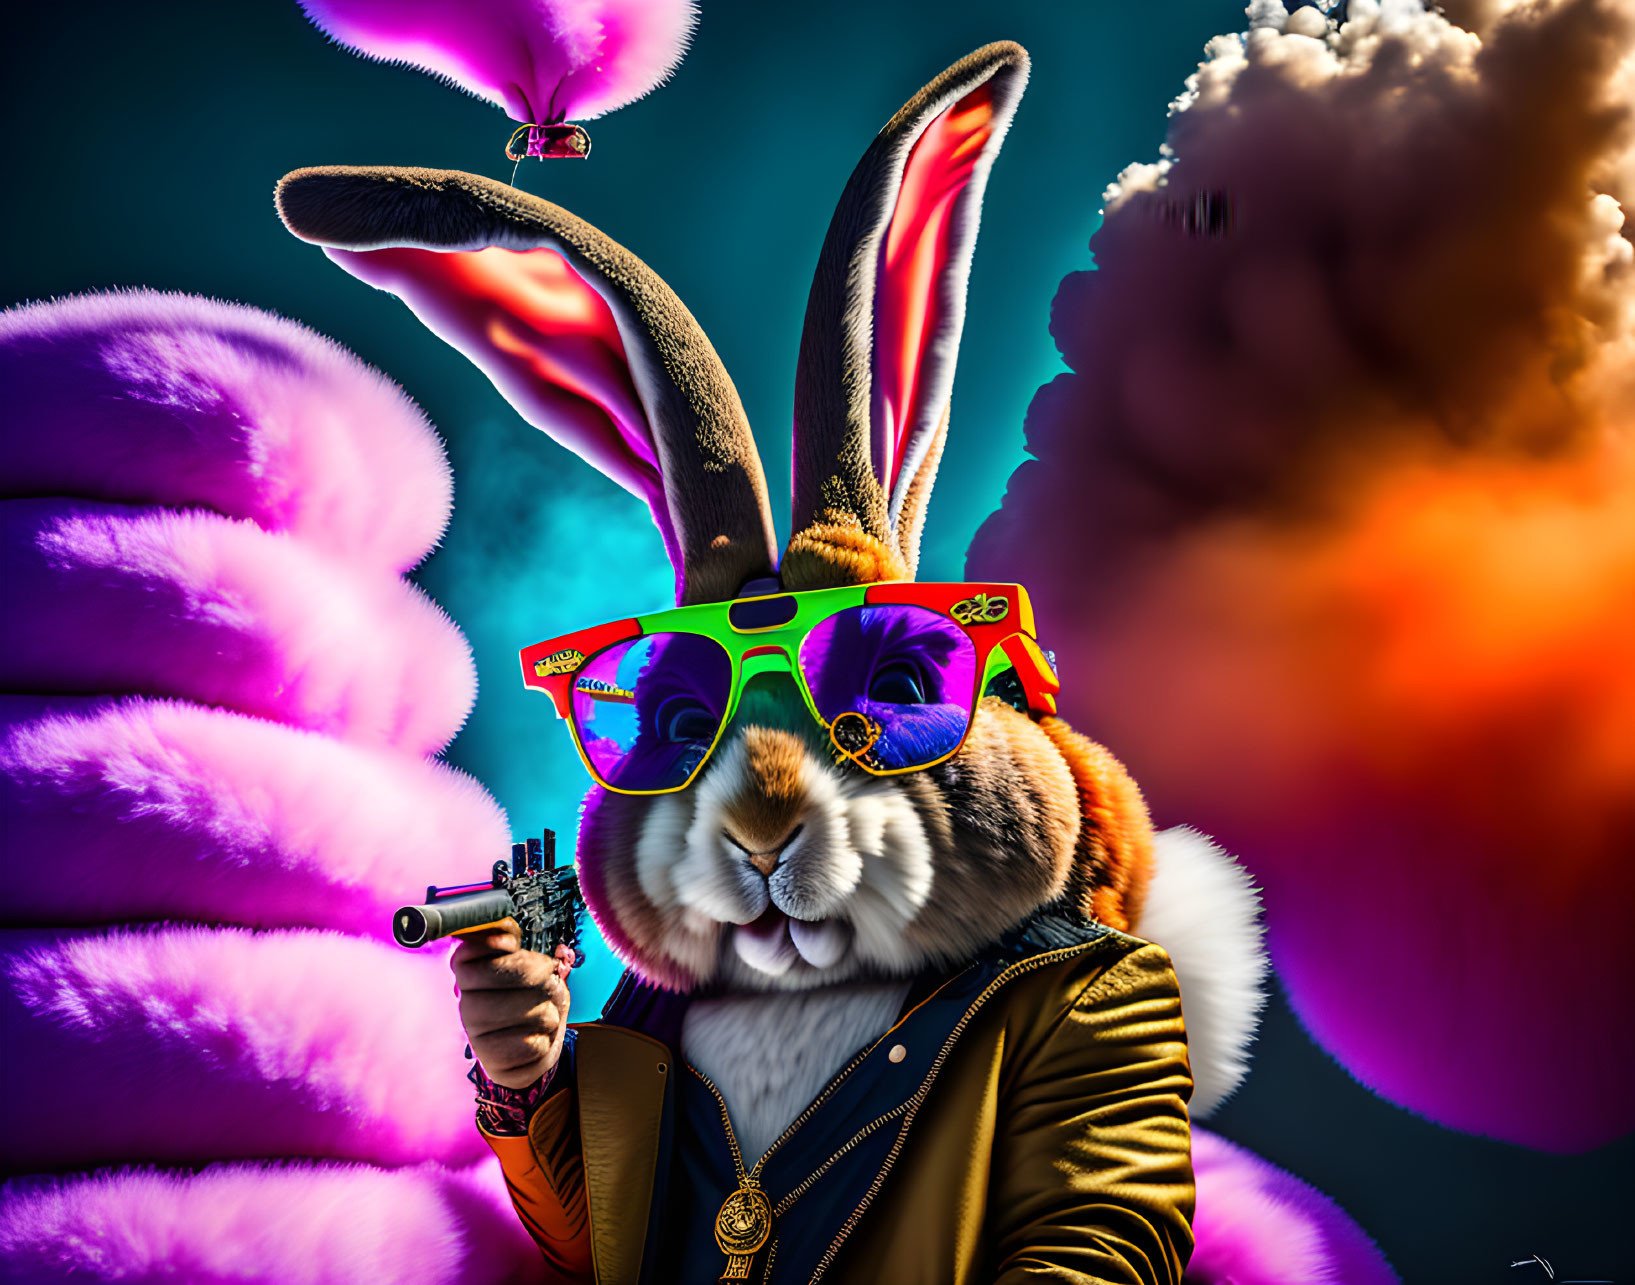 Rabbit with human-like features in sunglasses and jacket on colorful background